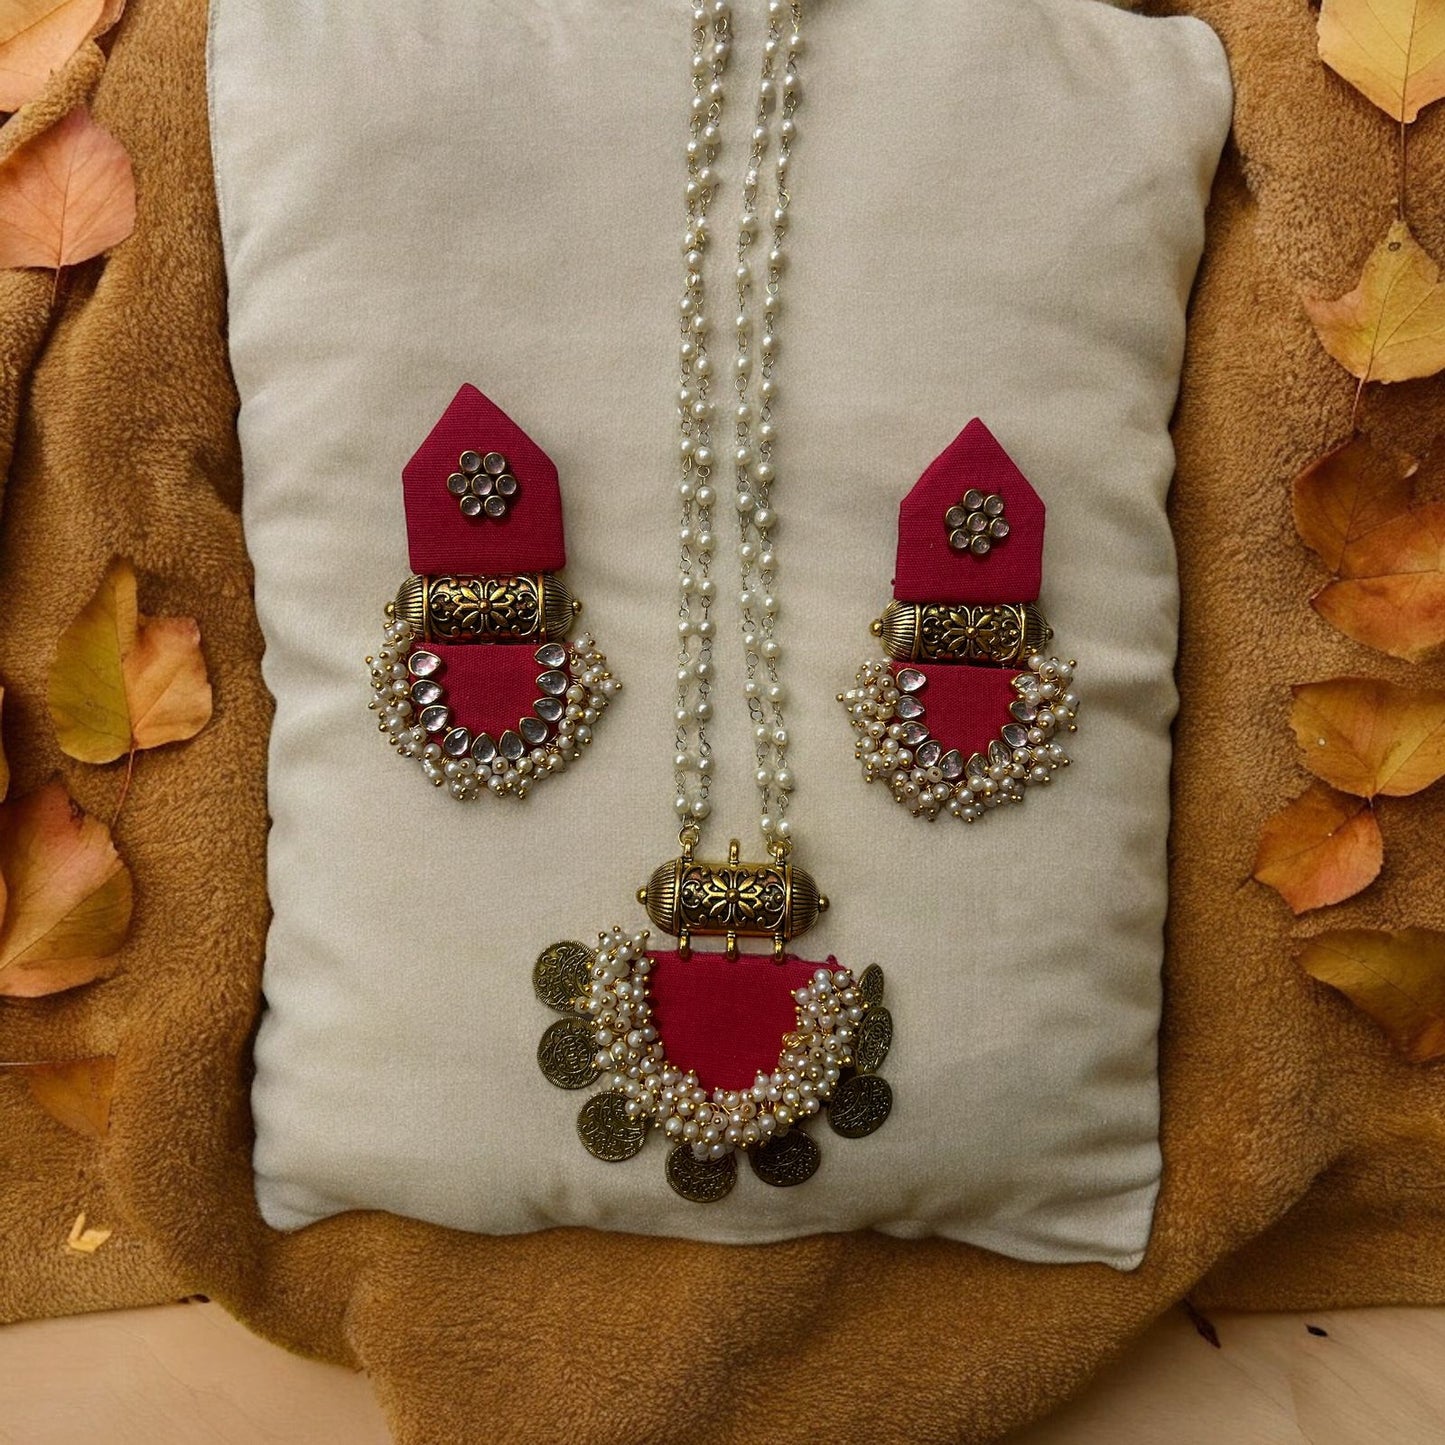 Ethinic jewelry set on fabric with accessories